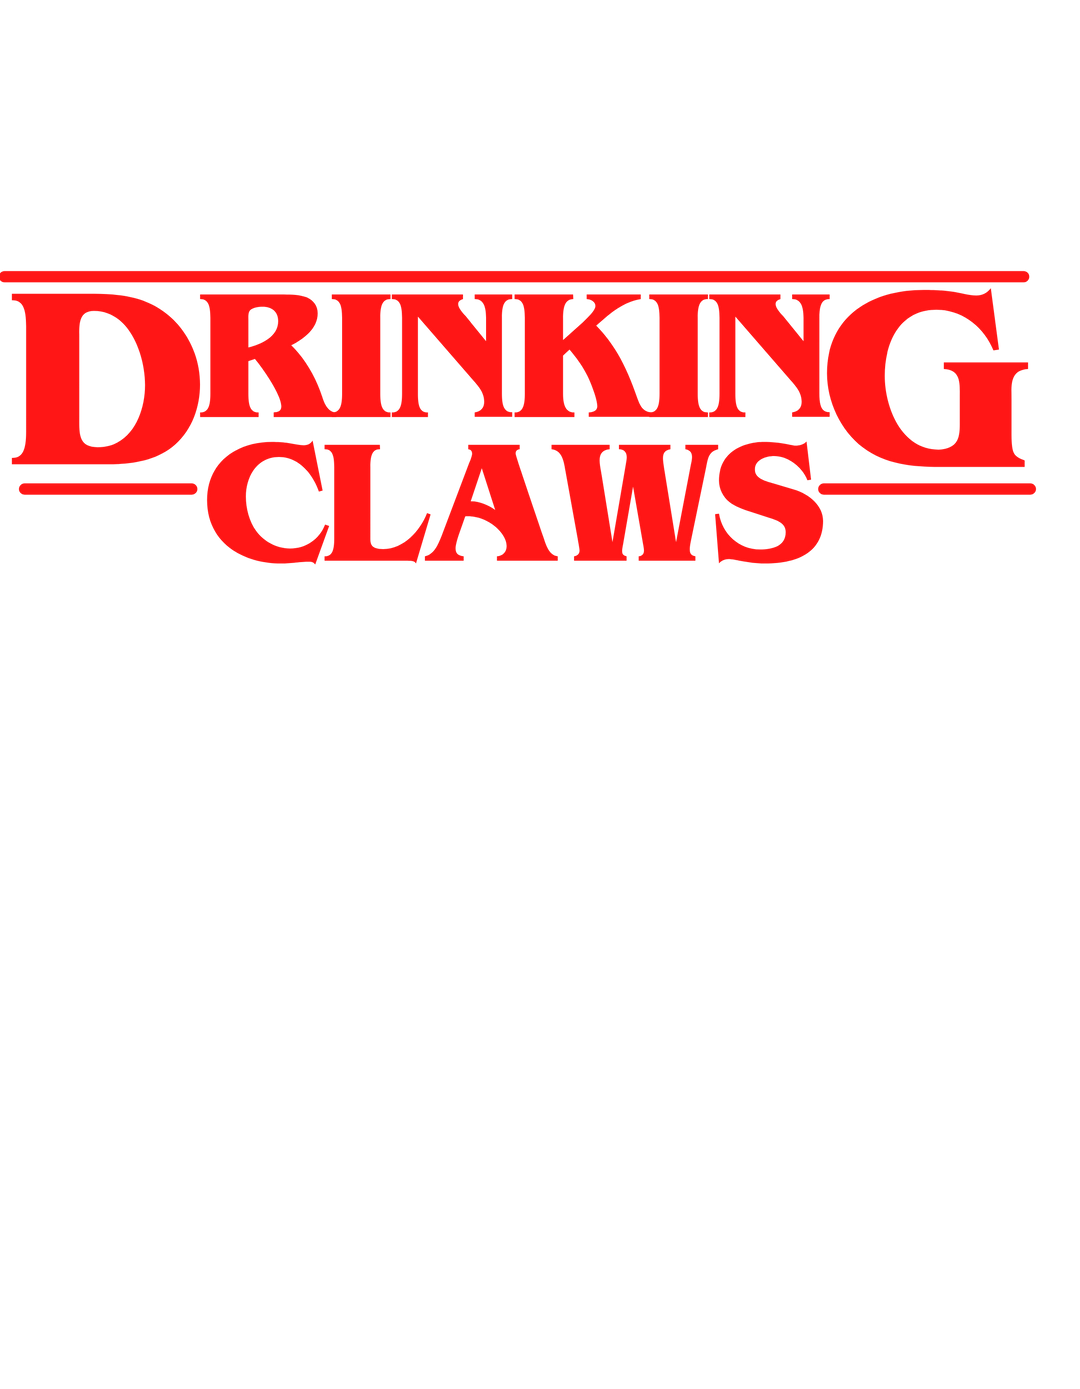 DRINKING CLAWS